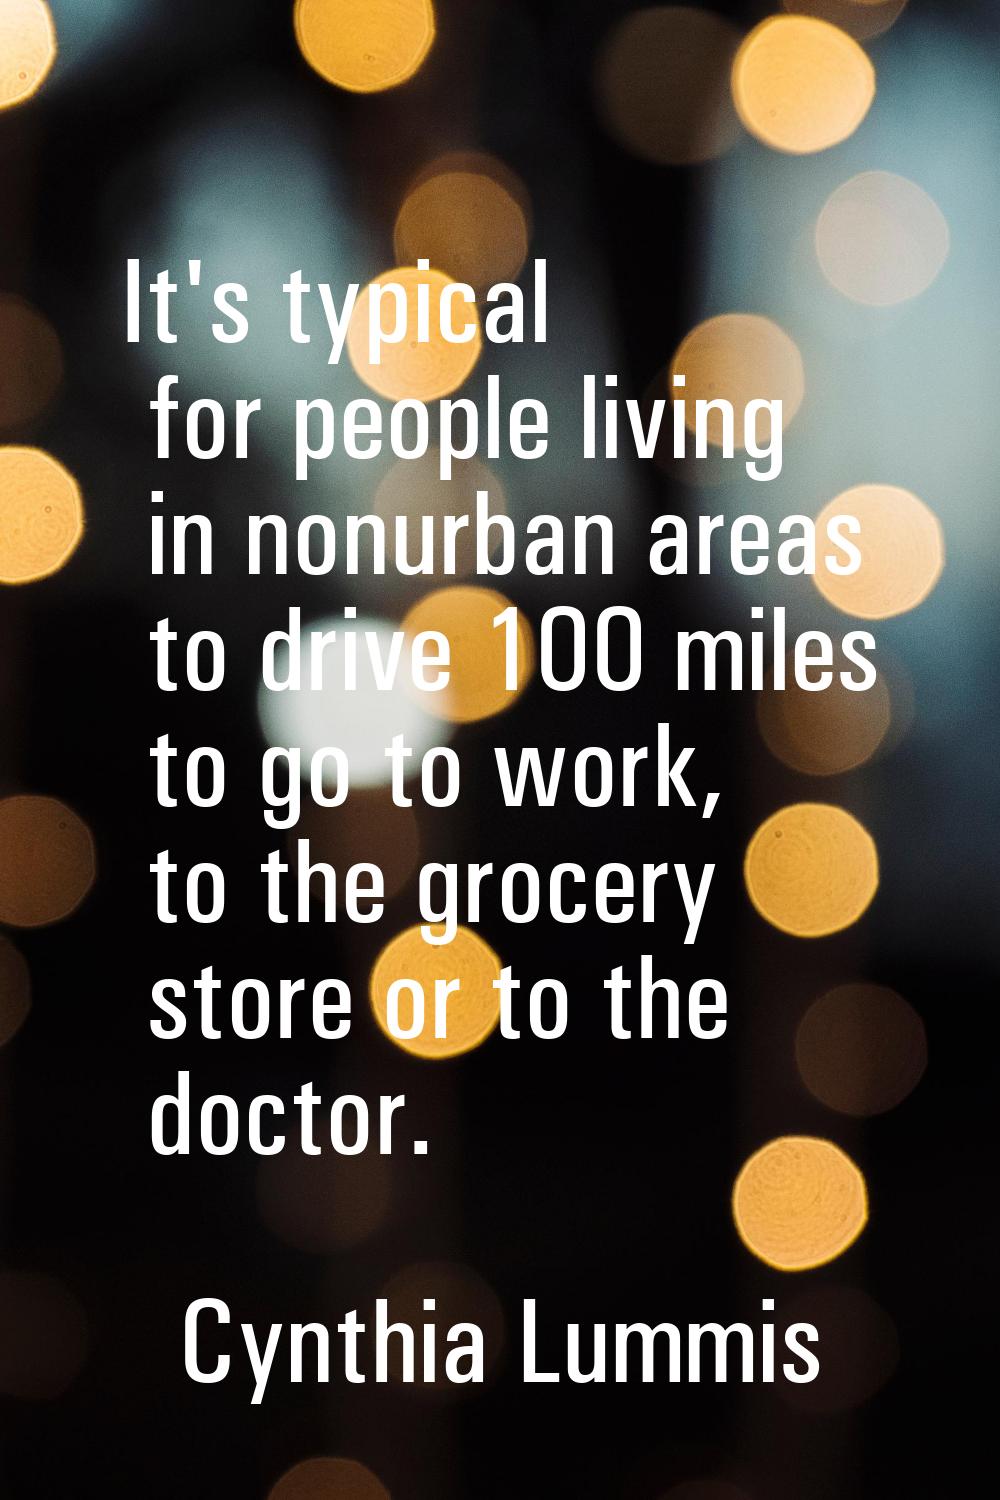 It's typical for people living in nonurban areas to drive 100 miles to go to work, to the grocery s